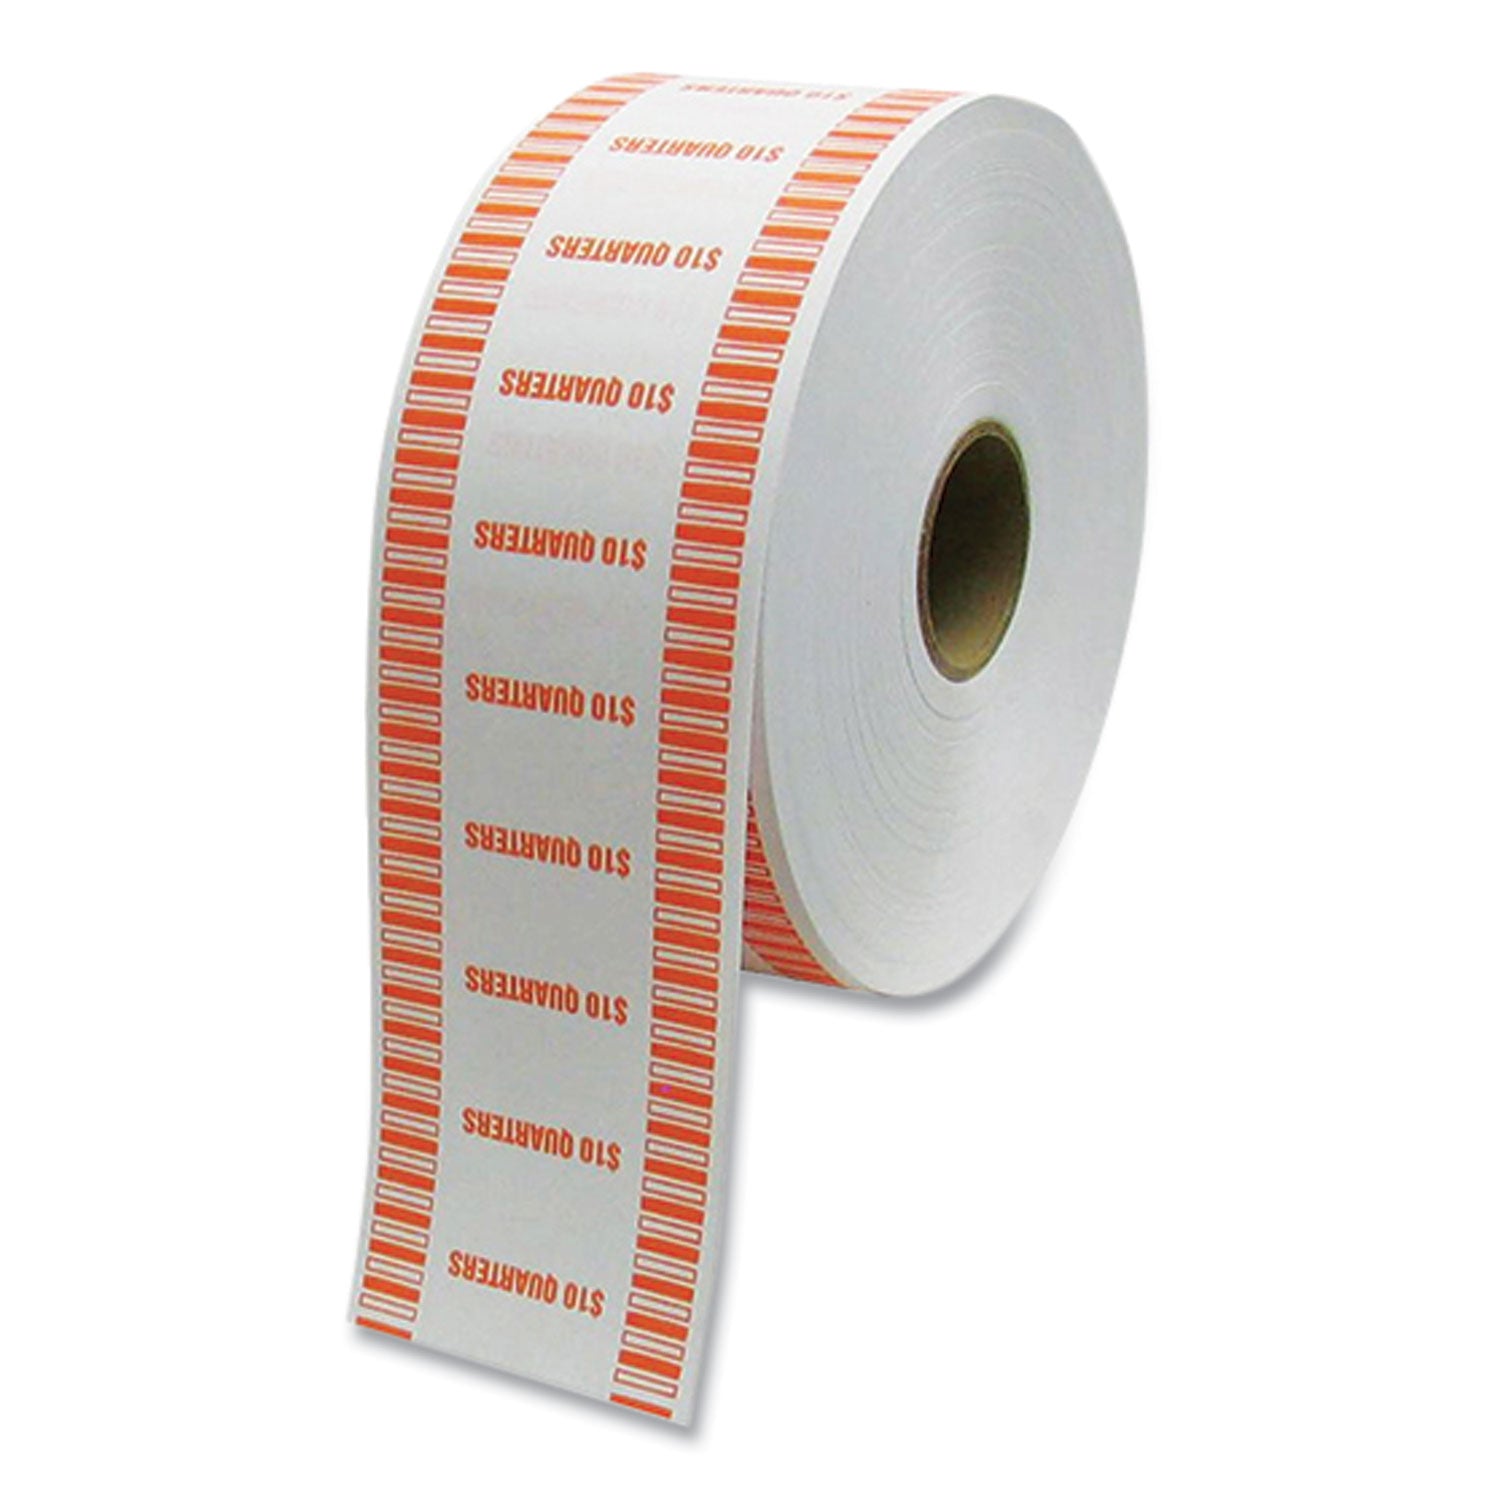 automatic-coin-wrapper-roll-for-coin-wrapping-machines-quarters-$1000-kraft-orange-2000-roll-8-rolls-carton_cnk575037 - 1